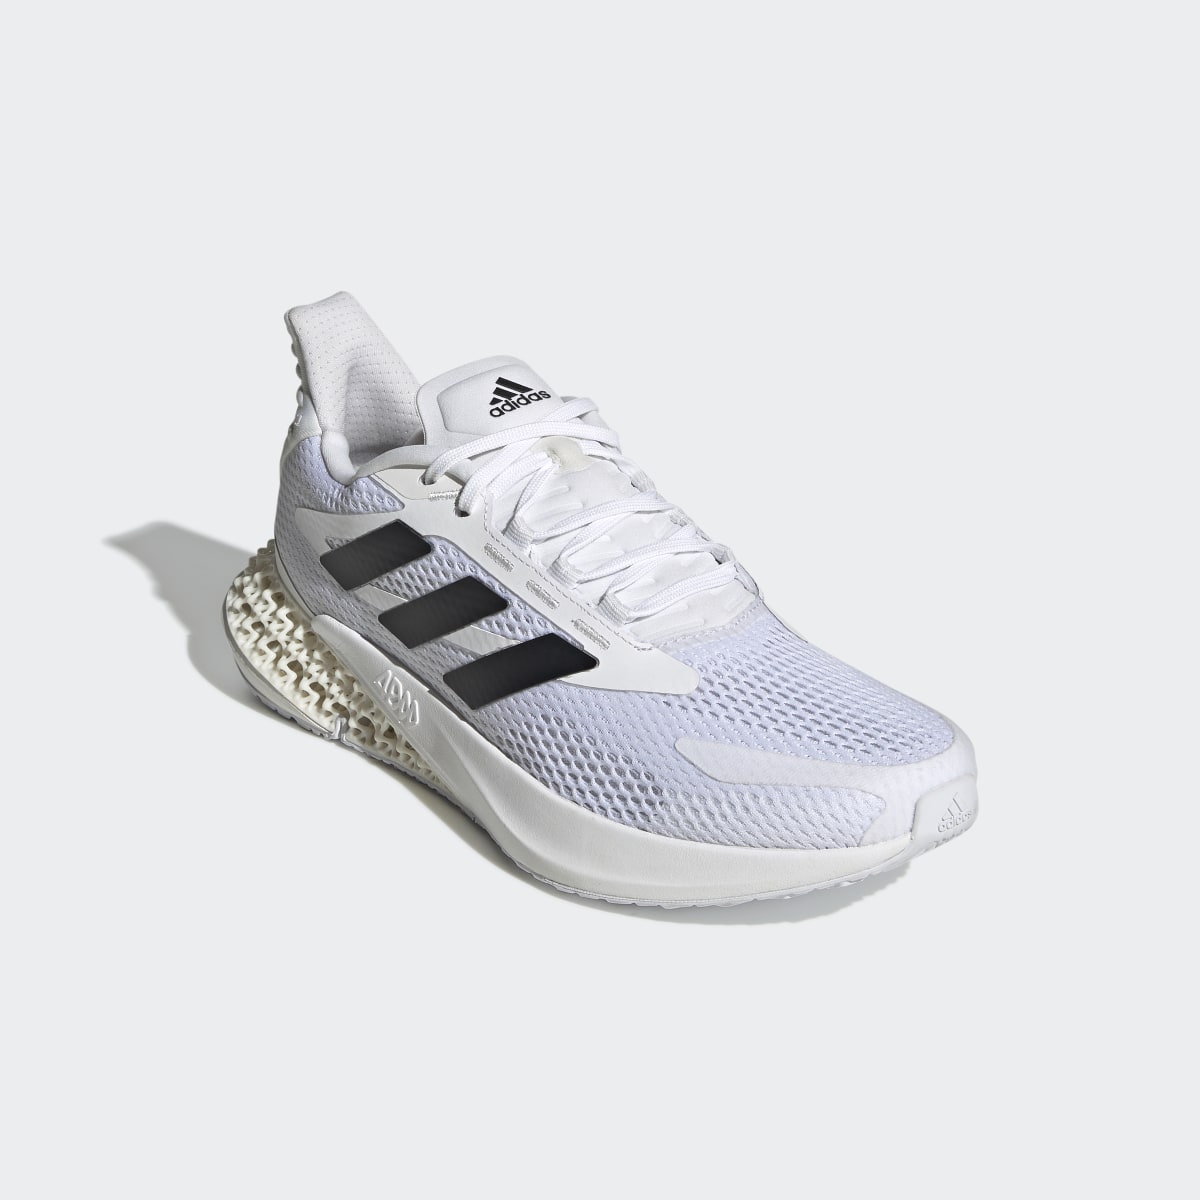 Adidas 4DFWD Pulse Shoes. 5